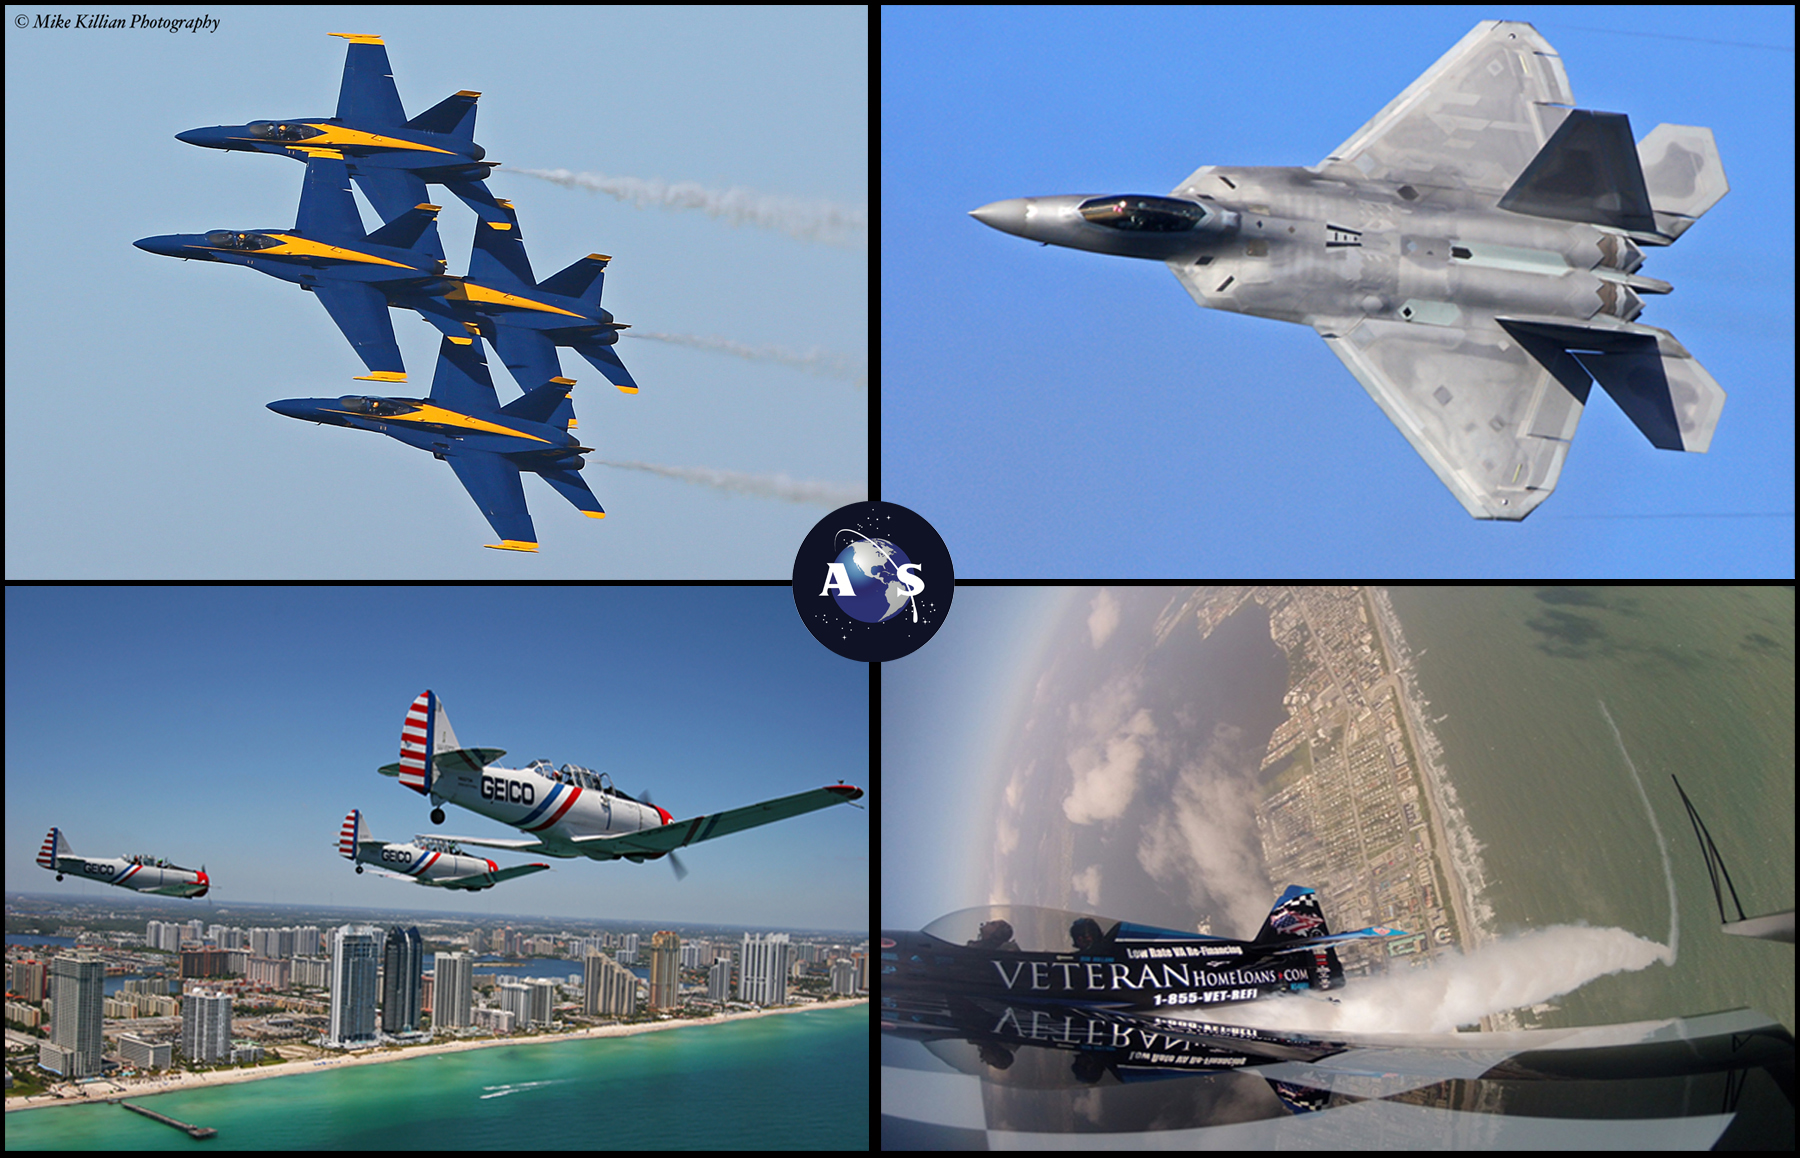 One of the biggest aviation events in the world kicks off this week in central Florida, headlined by air show demonstrations by performers such as Rob Holland, the GEICO Skytypers, the USAF F-22 Raptor demo team and the US Navy Blue Angels. Photos Credit: AmericaSpace / Mike Killian  